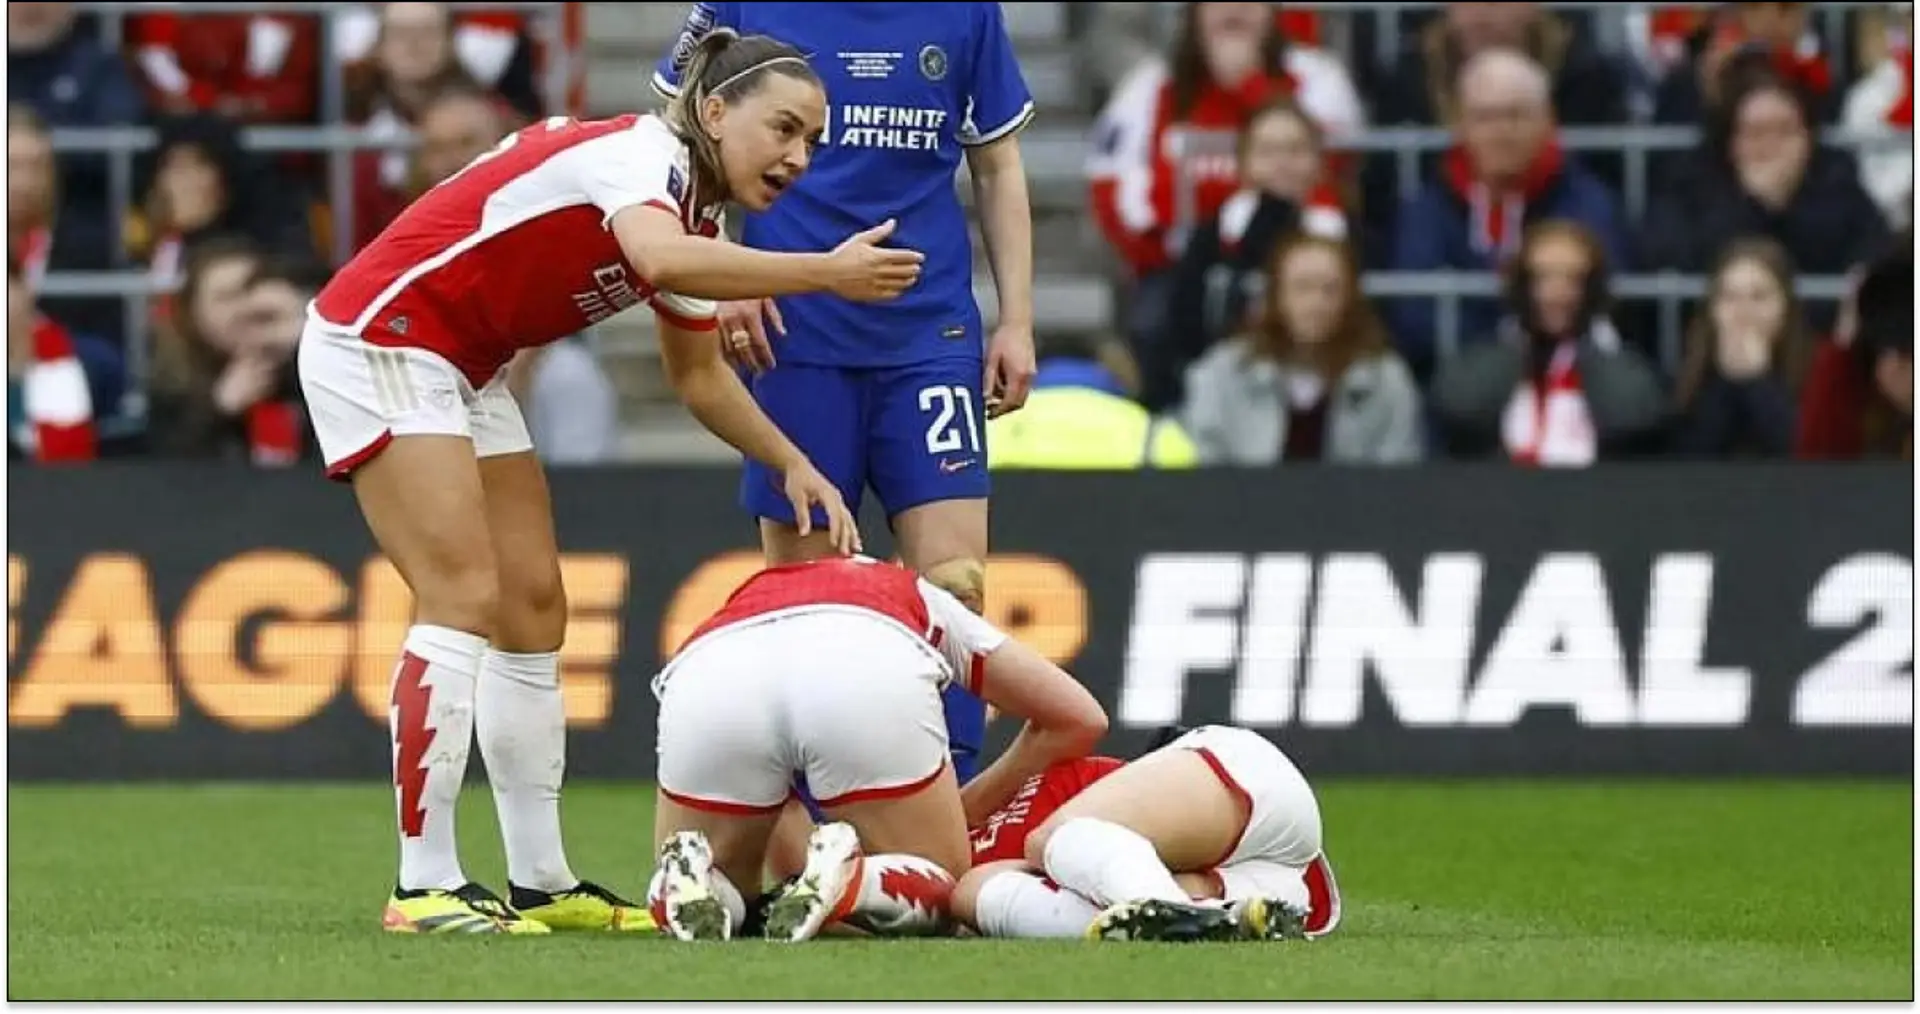 Arsenal Women's Frida Maanum collapses on the pitch during League Cup final